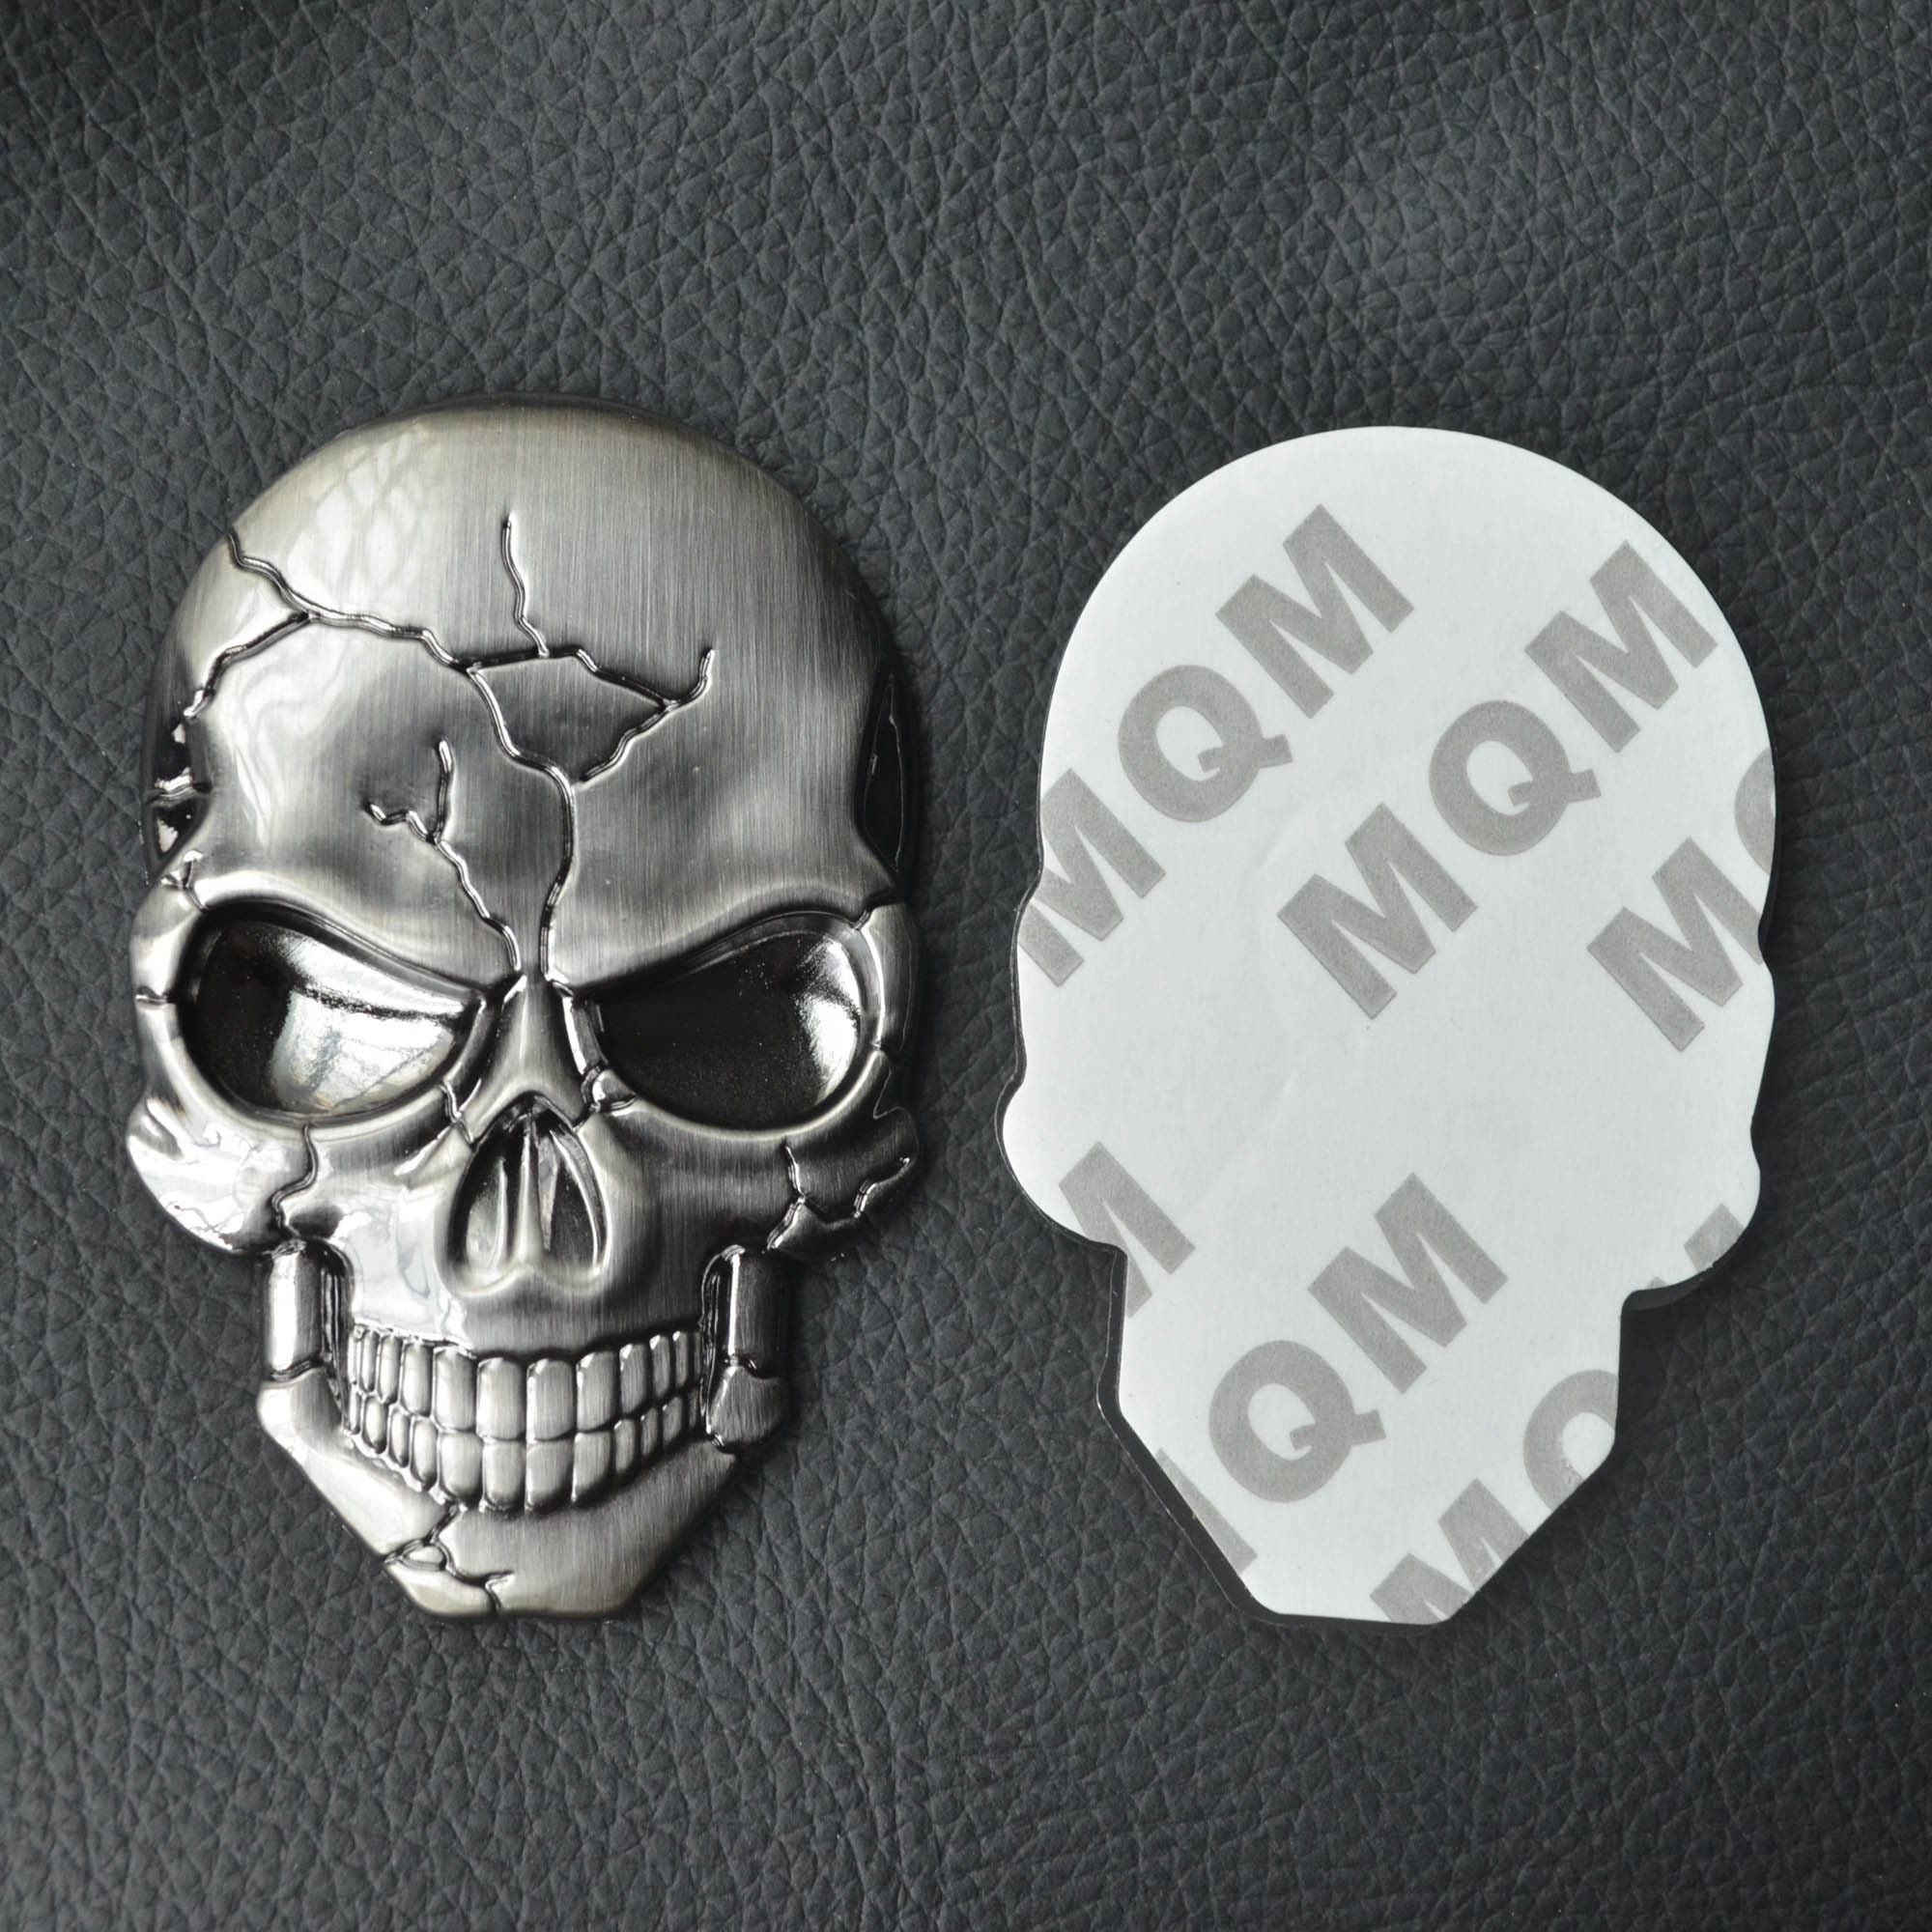 2pcs Car Styling 3D Metal Skeleton Skull Emblem Badge Stickers Decals Auto  Truck Motorcycle Car Accessories Automobiles